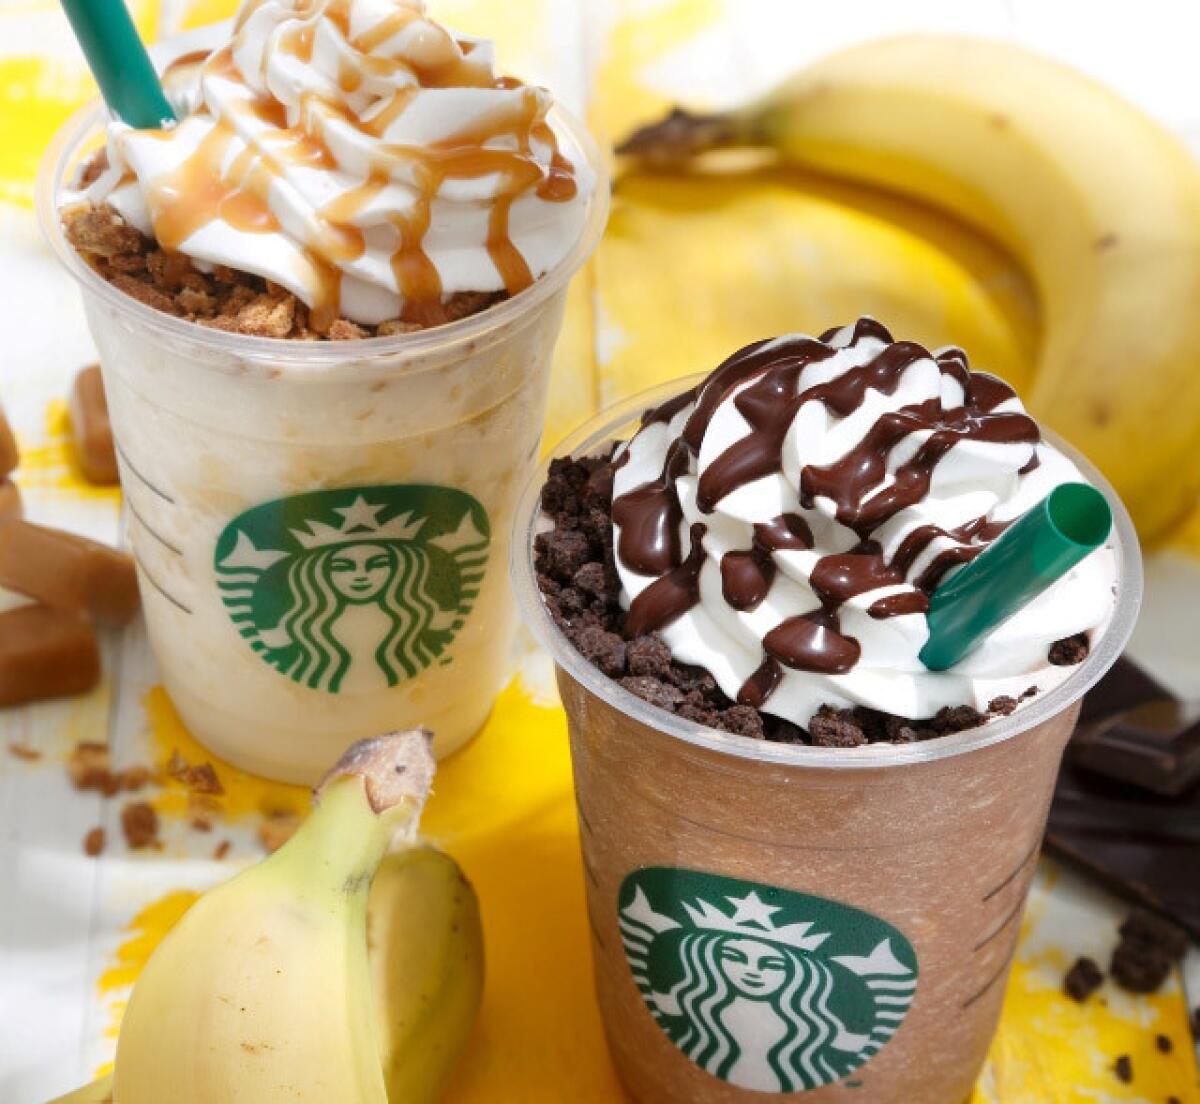 Starbucks Japan is launching two new flavors of Frappuccinos with fresh bananas and brownie crumbles.